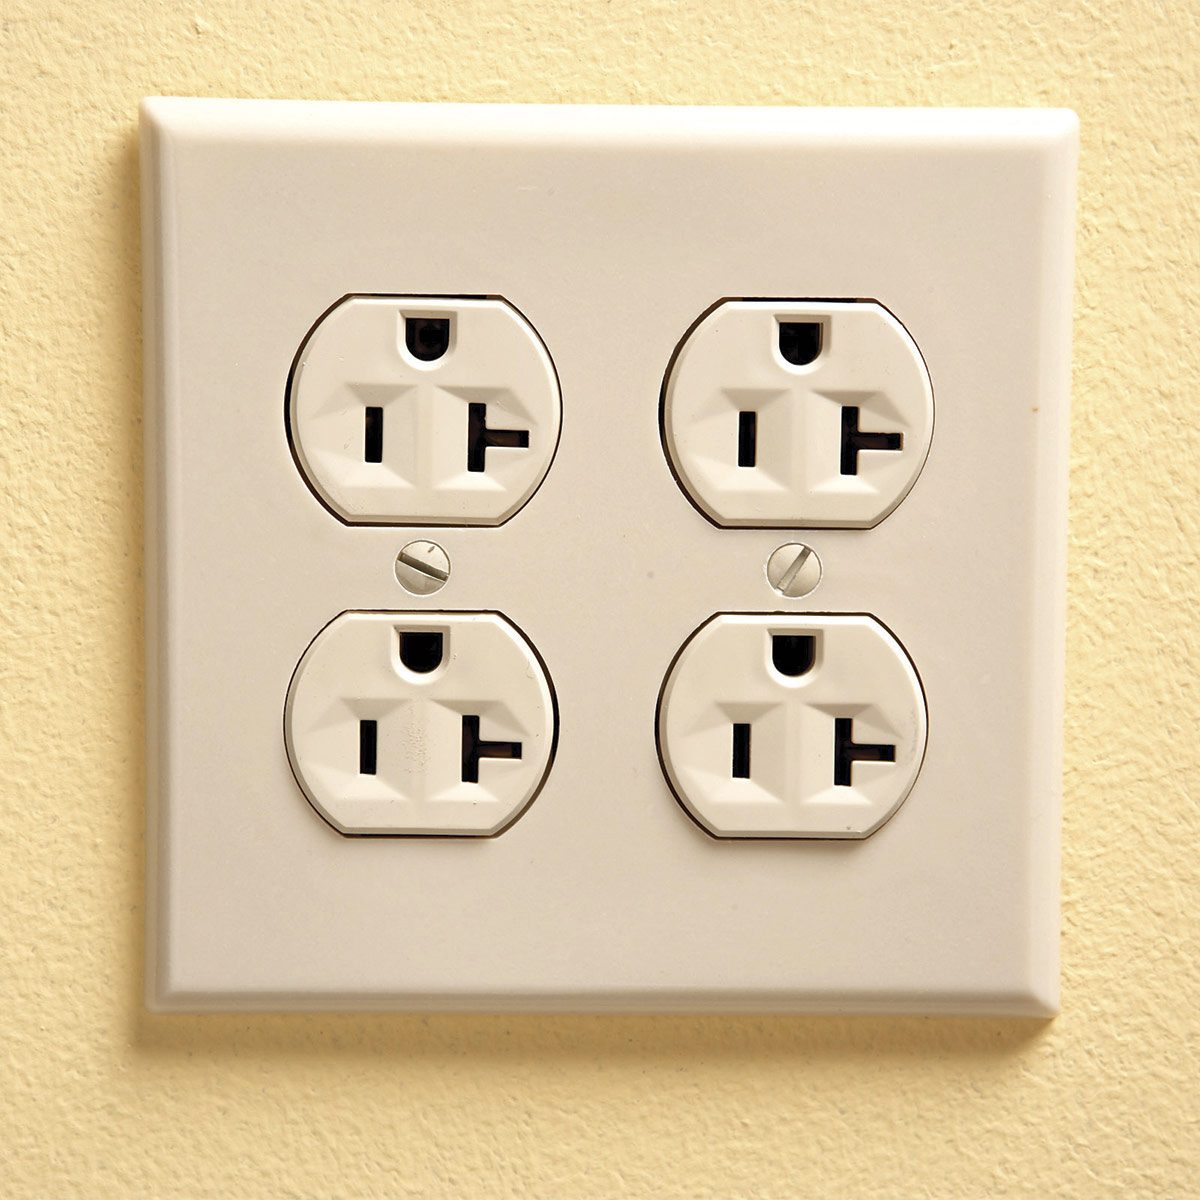 How to Replace a Standard 120-Volt Outlet Receptacle